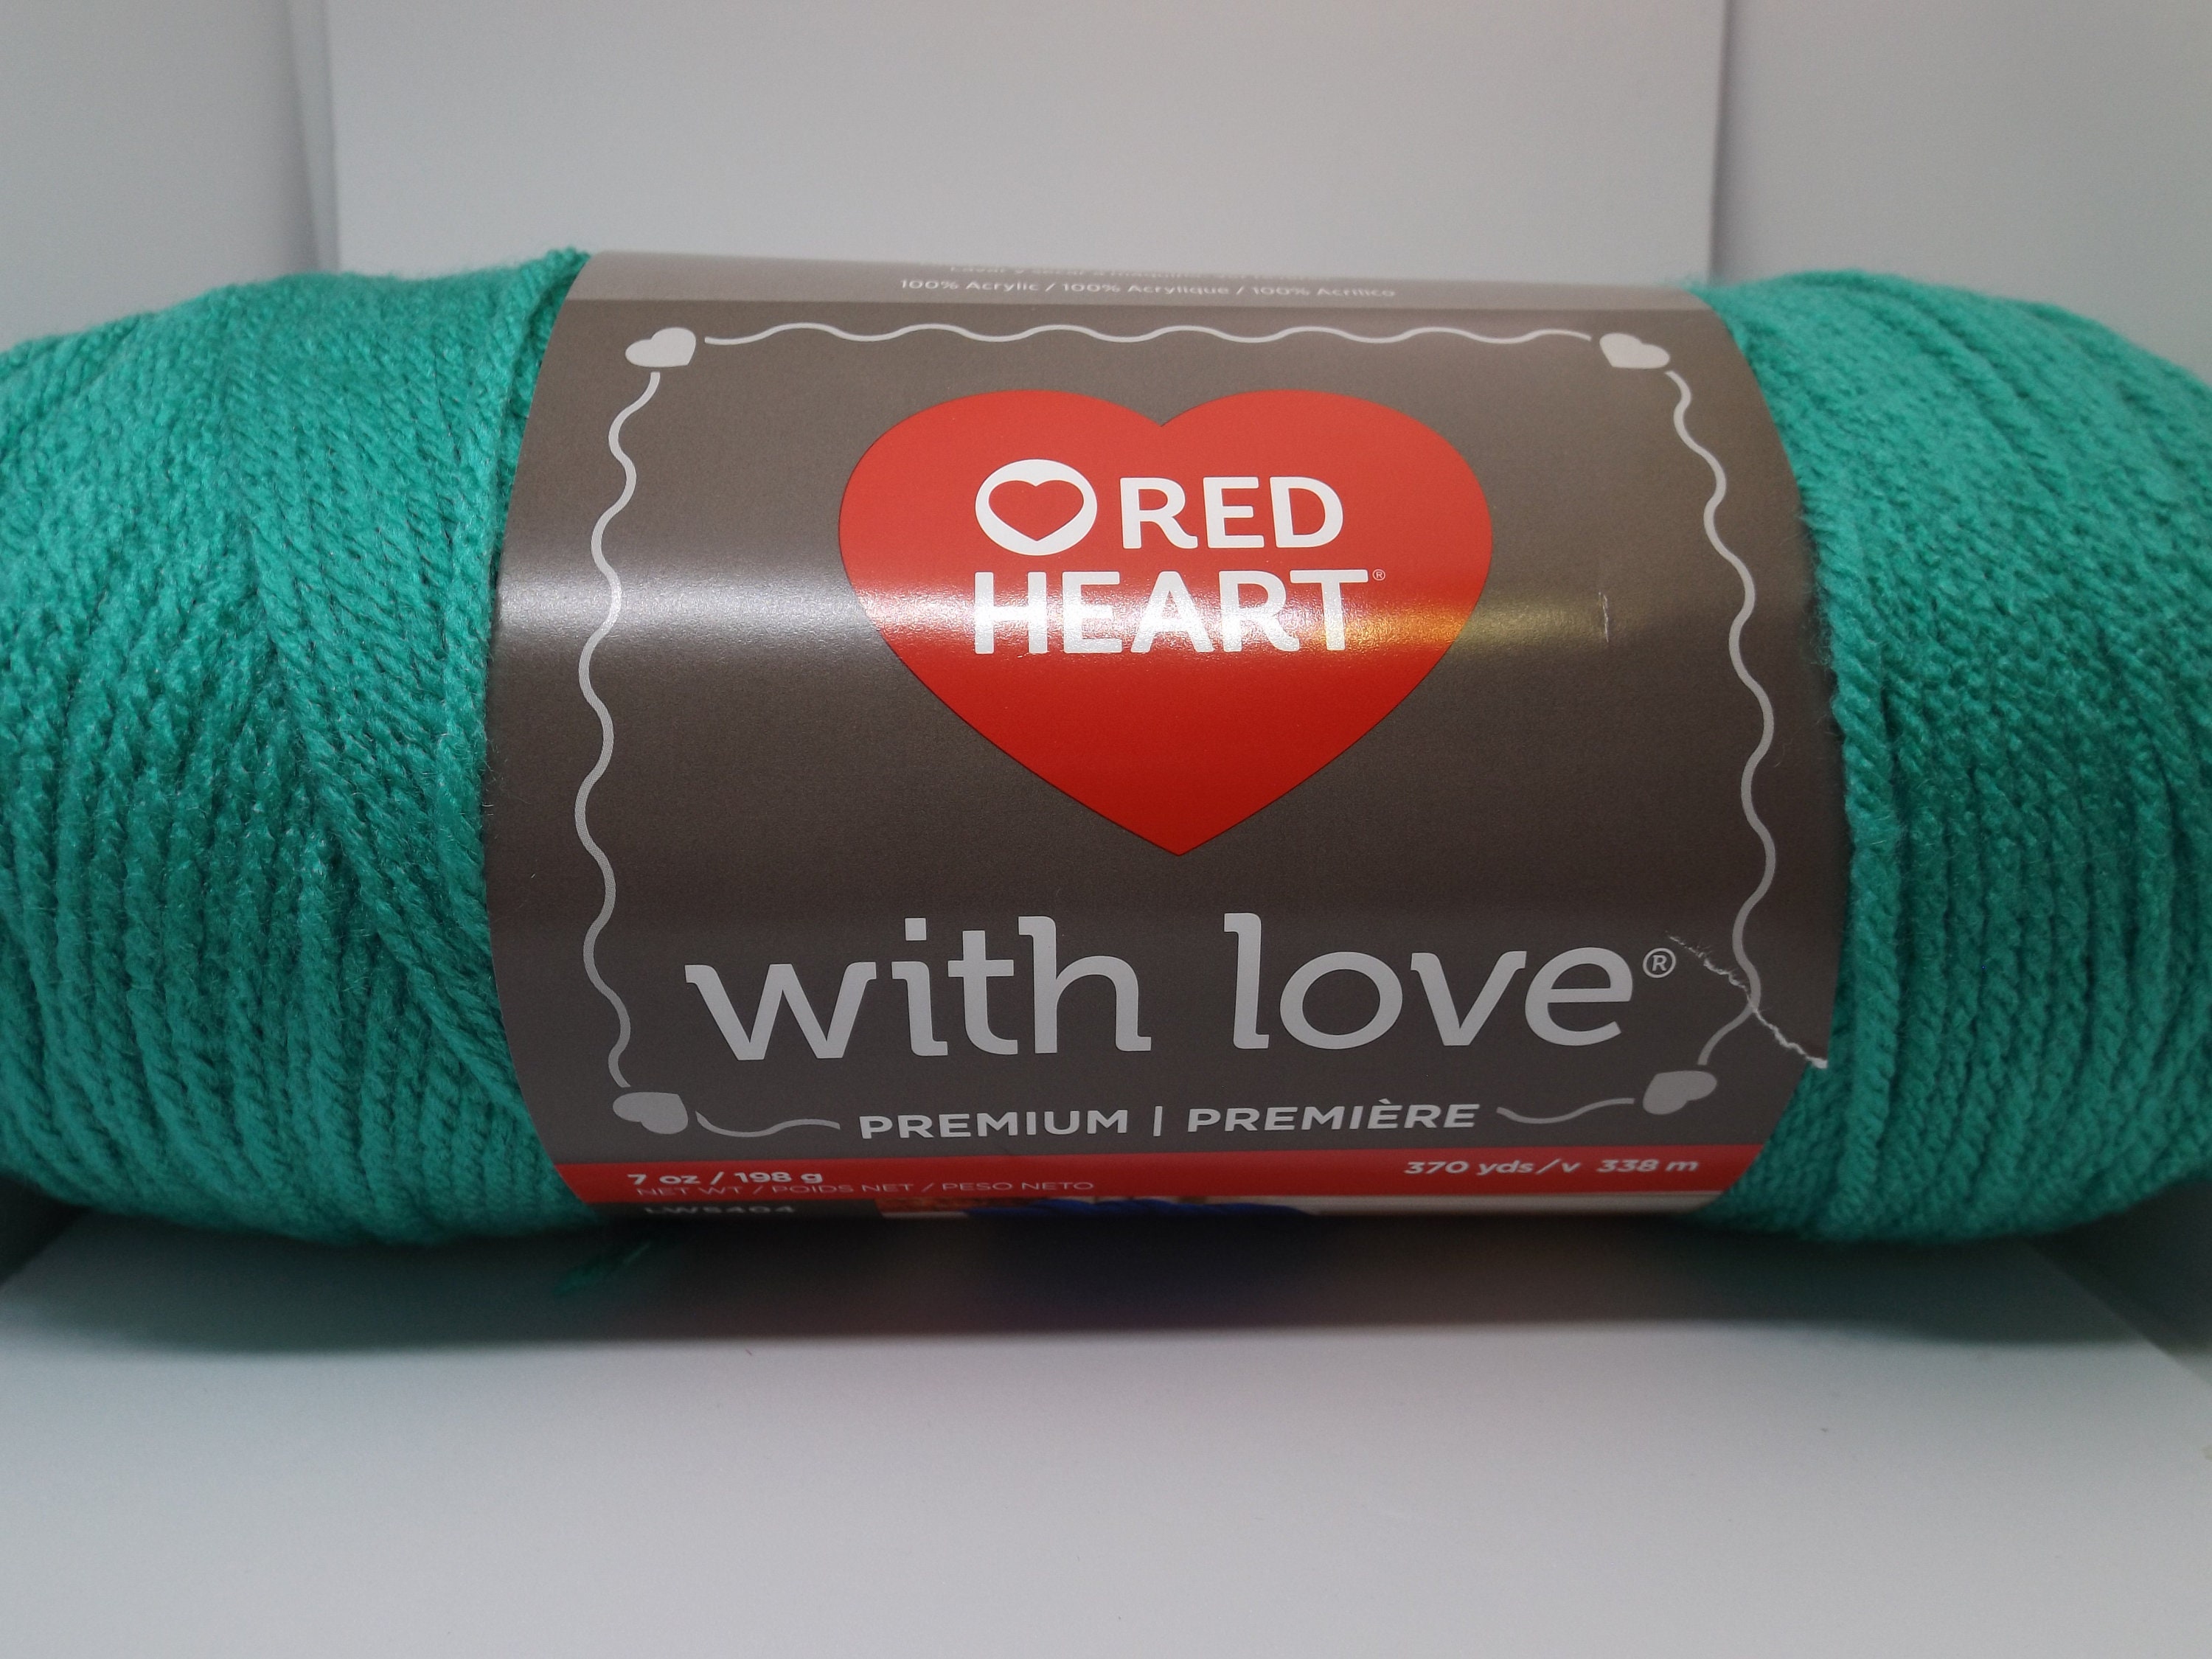 Red Heart With Love Black Yarn - 3 Pack of 198g/7oz - Acrylic - 4 Medium  (Worsted) - 370 Yards - Knitting/Crochet